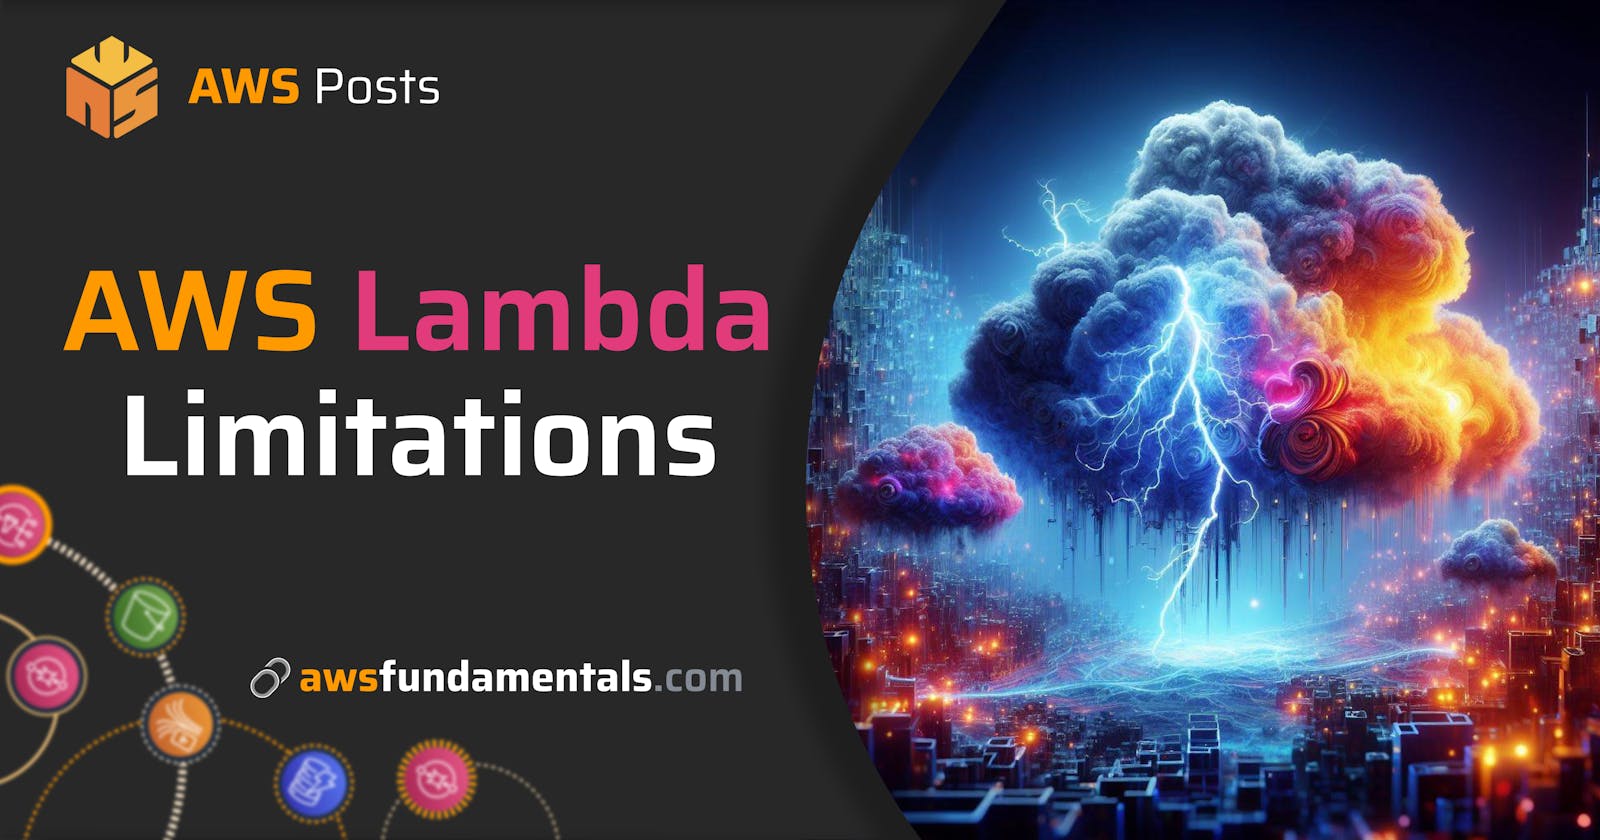 Making the Most of AWS Lambda - Navigating Its Limitations for Better Results